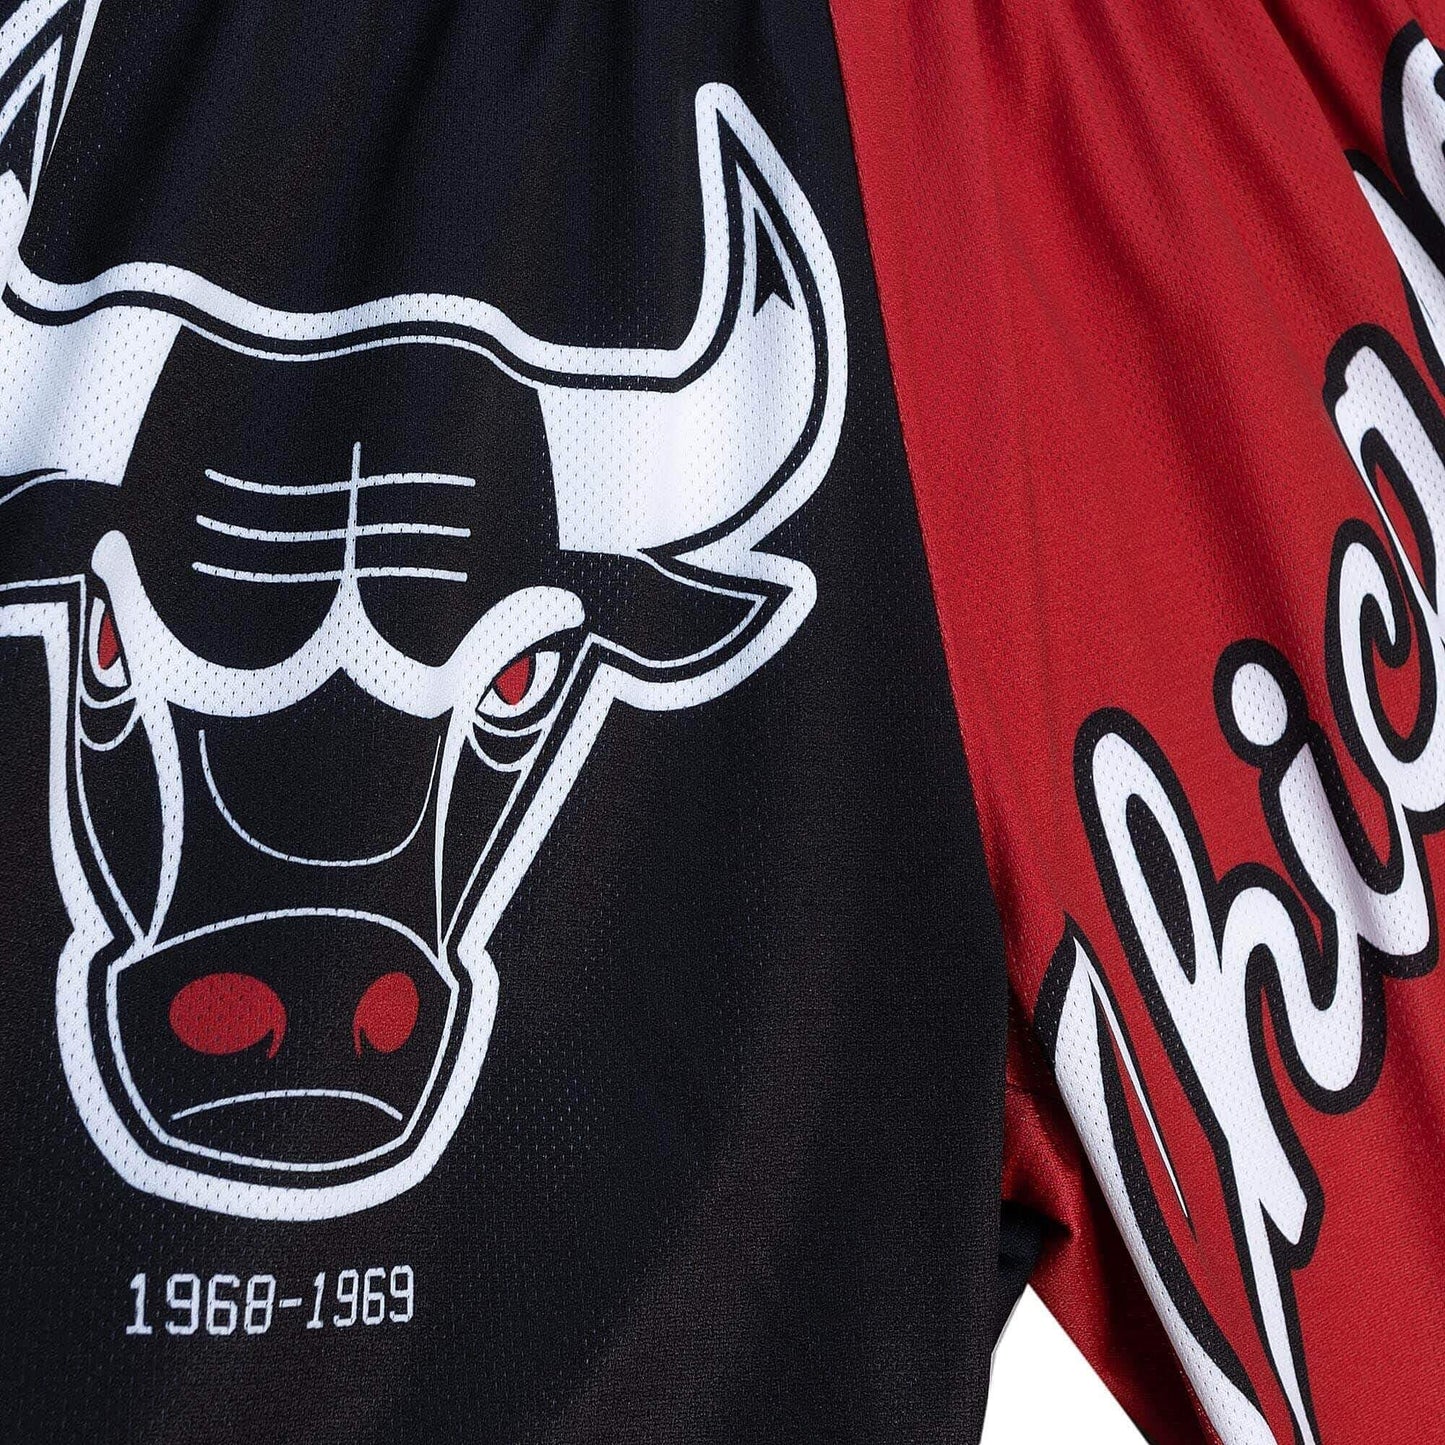 Mitchell And Ness NBA Big Face Shorts 5.0 - 8-20Y Chicago Bulls Black/Red/White